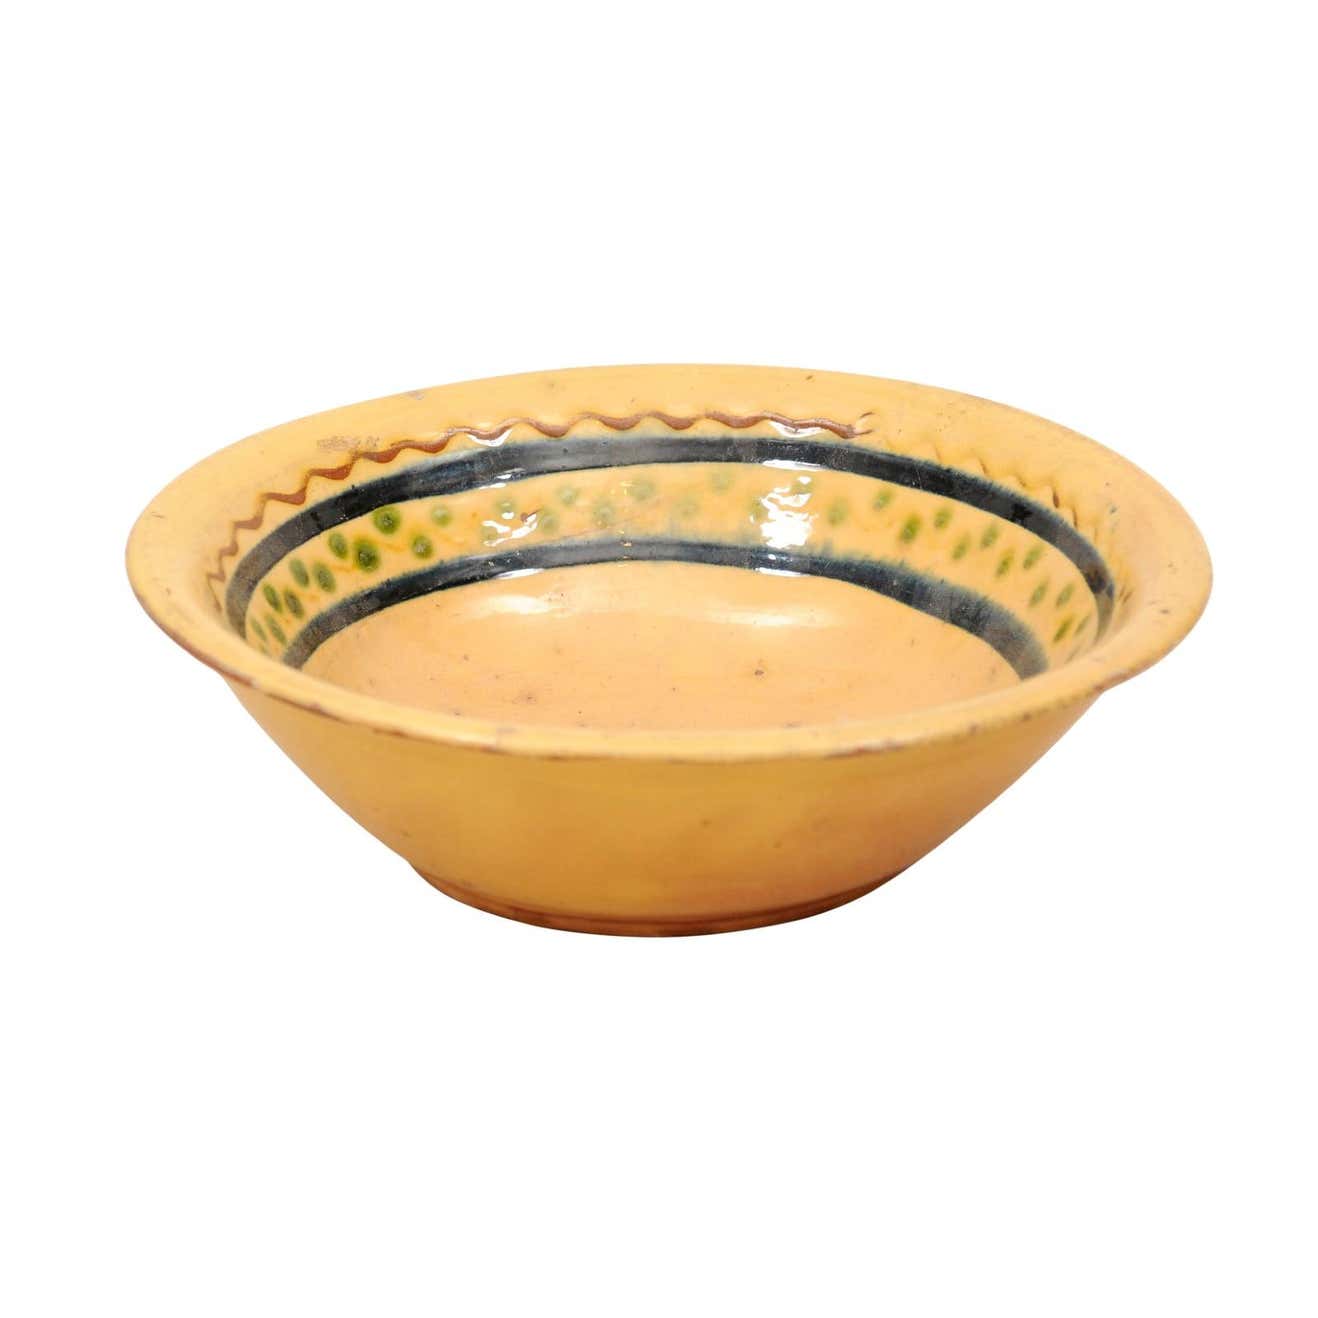 French 19th Century Bowl from the Poterie Hertz of Annecy, with Yellow Glaze